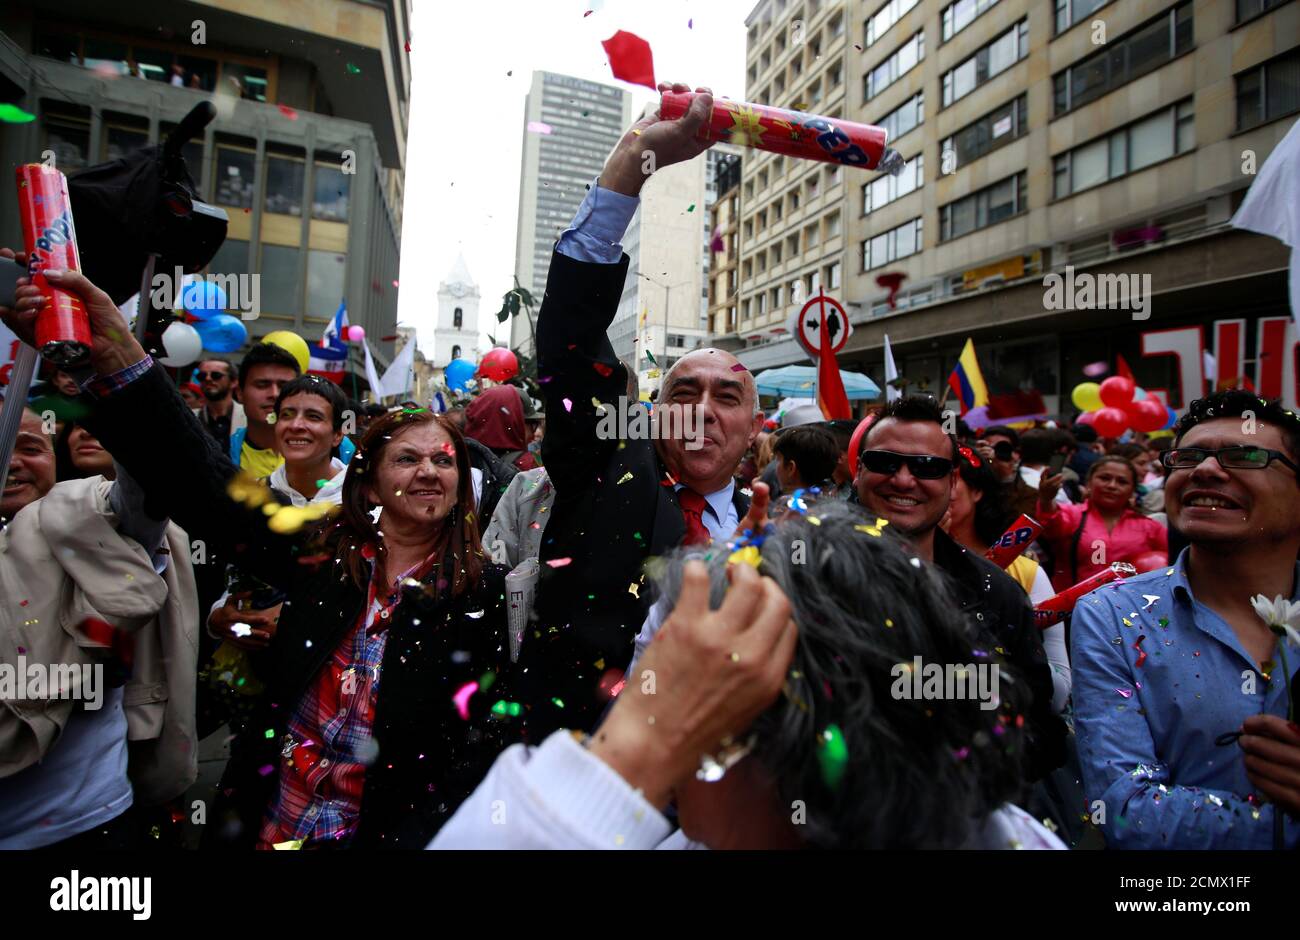 People celebrate the signature of a historic ceasefire deal between the Colombian government and FARC rebels, in Bogota, Colombia, June 23, 2016. REUTERS/John Vizcaino Stock Photo